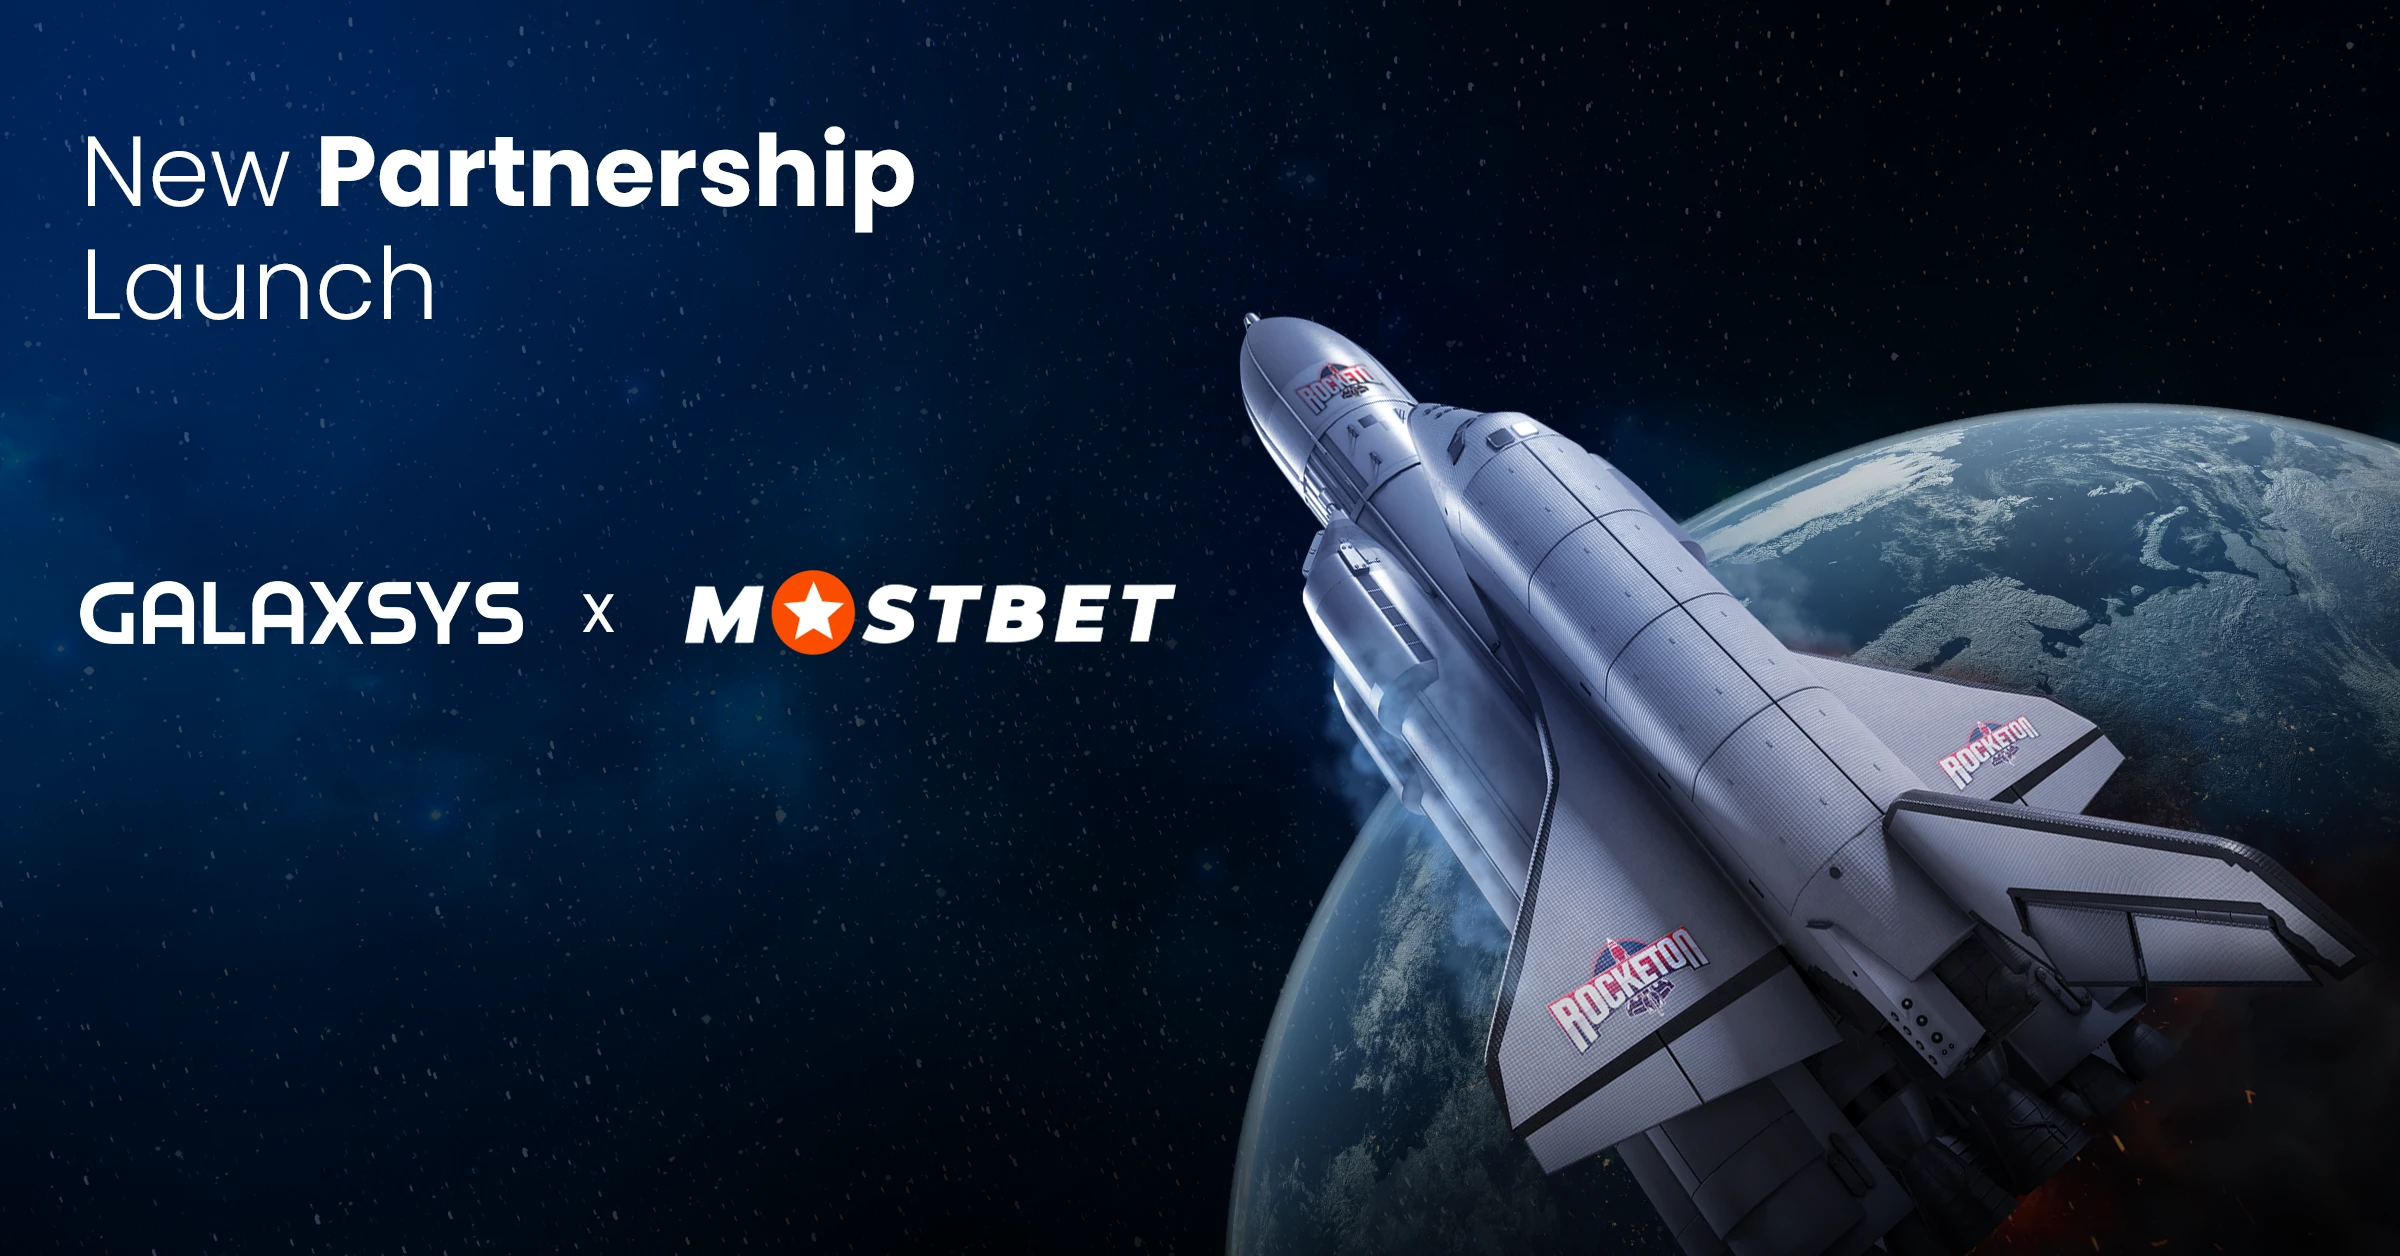 Galaxsys Mostbet